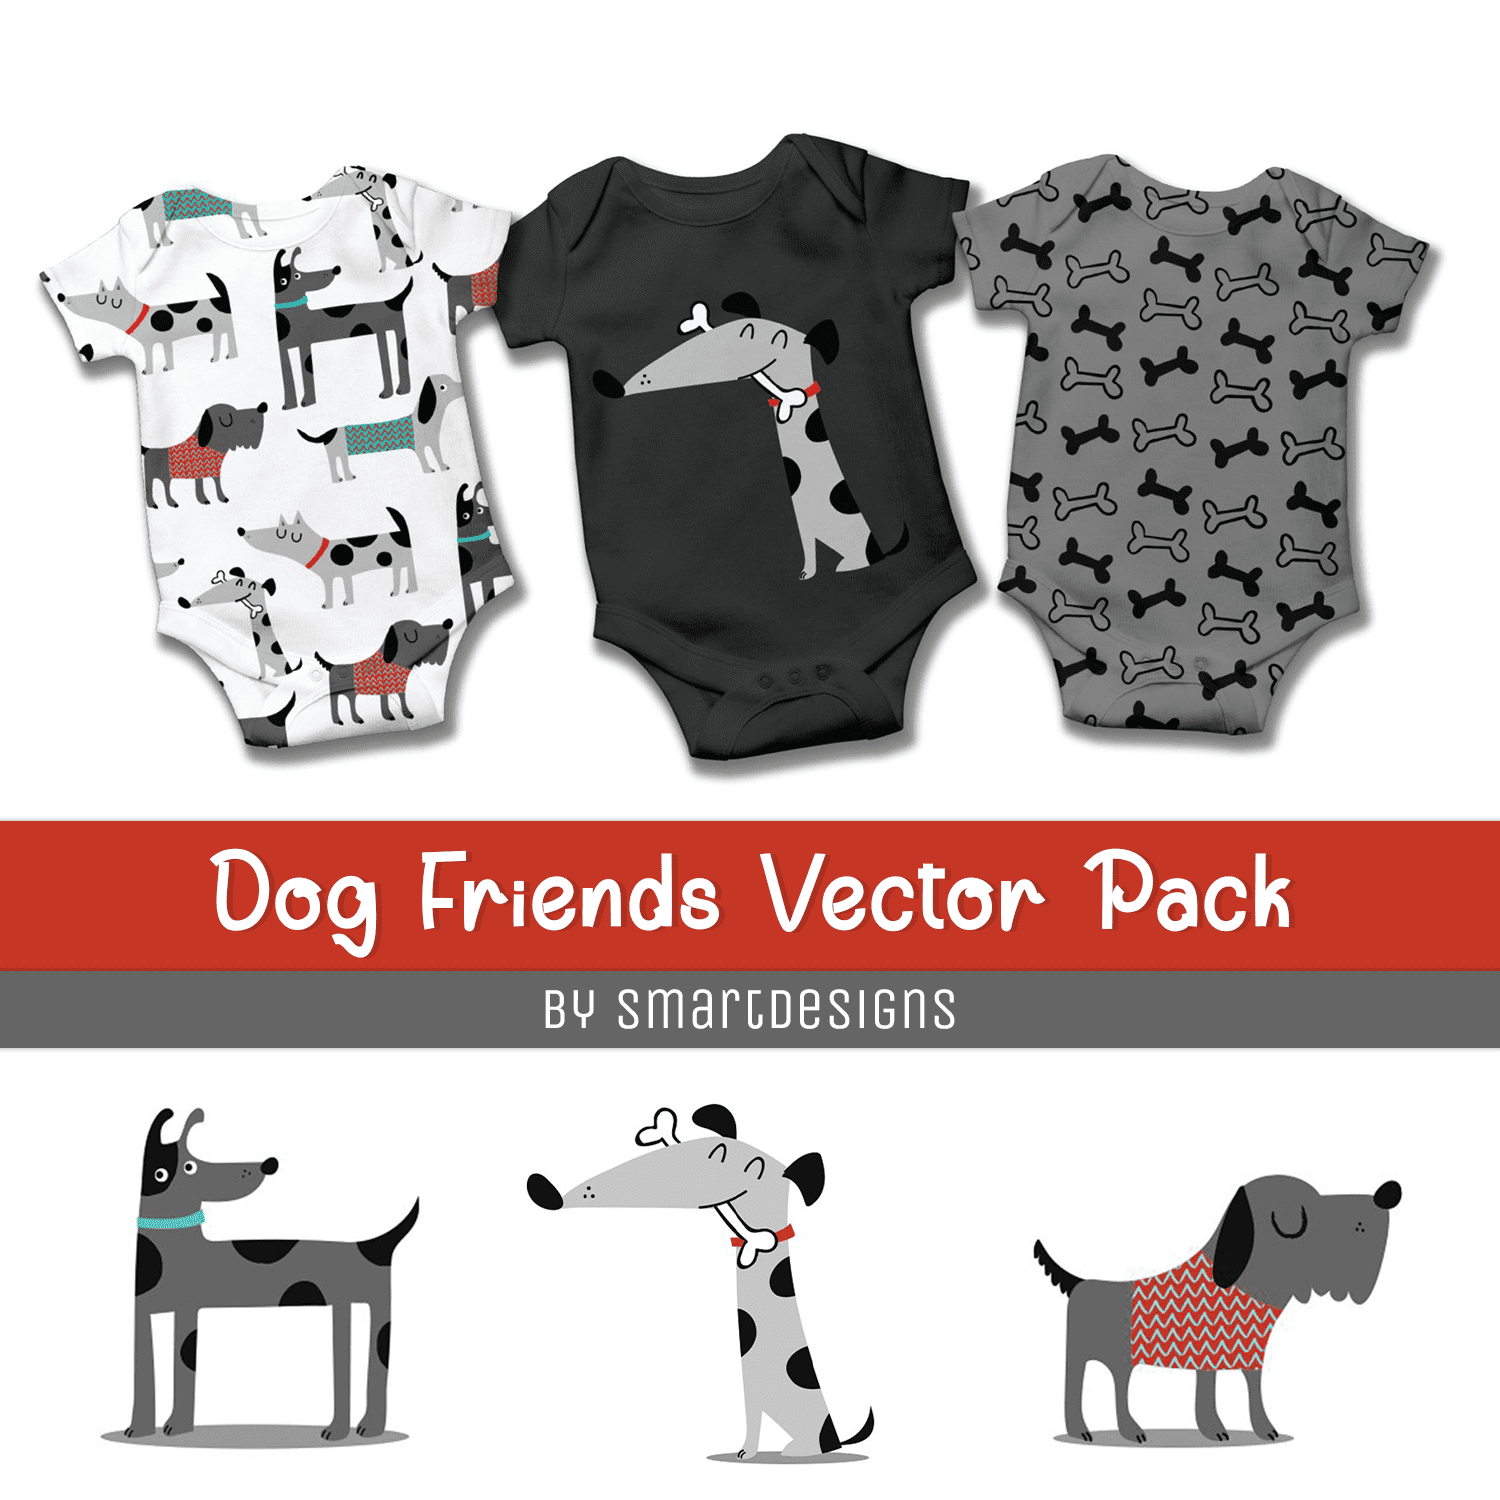 Preview dog friends vector pack.